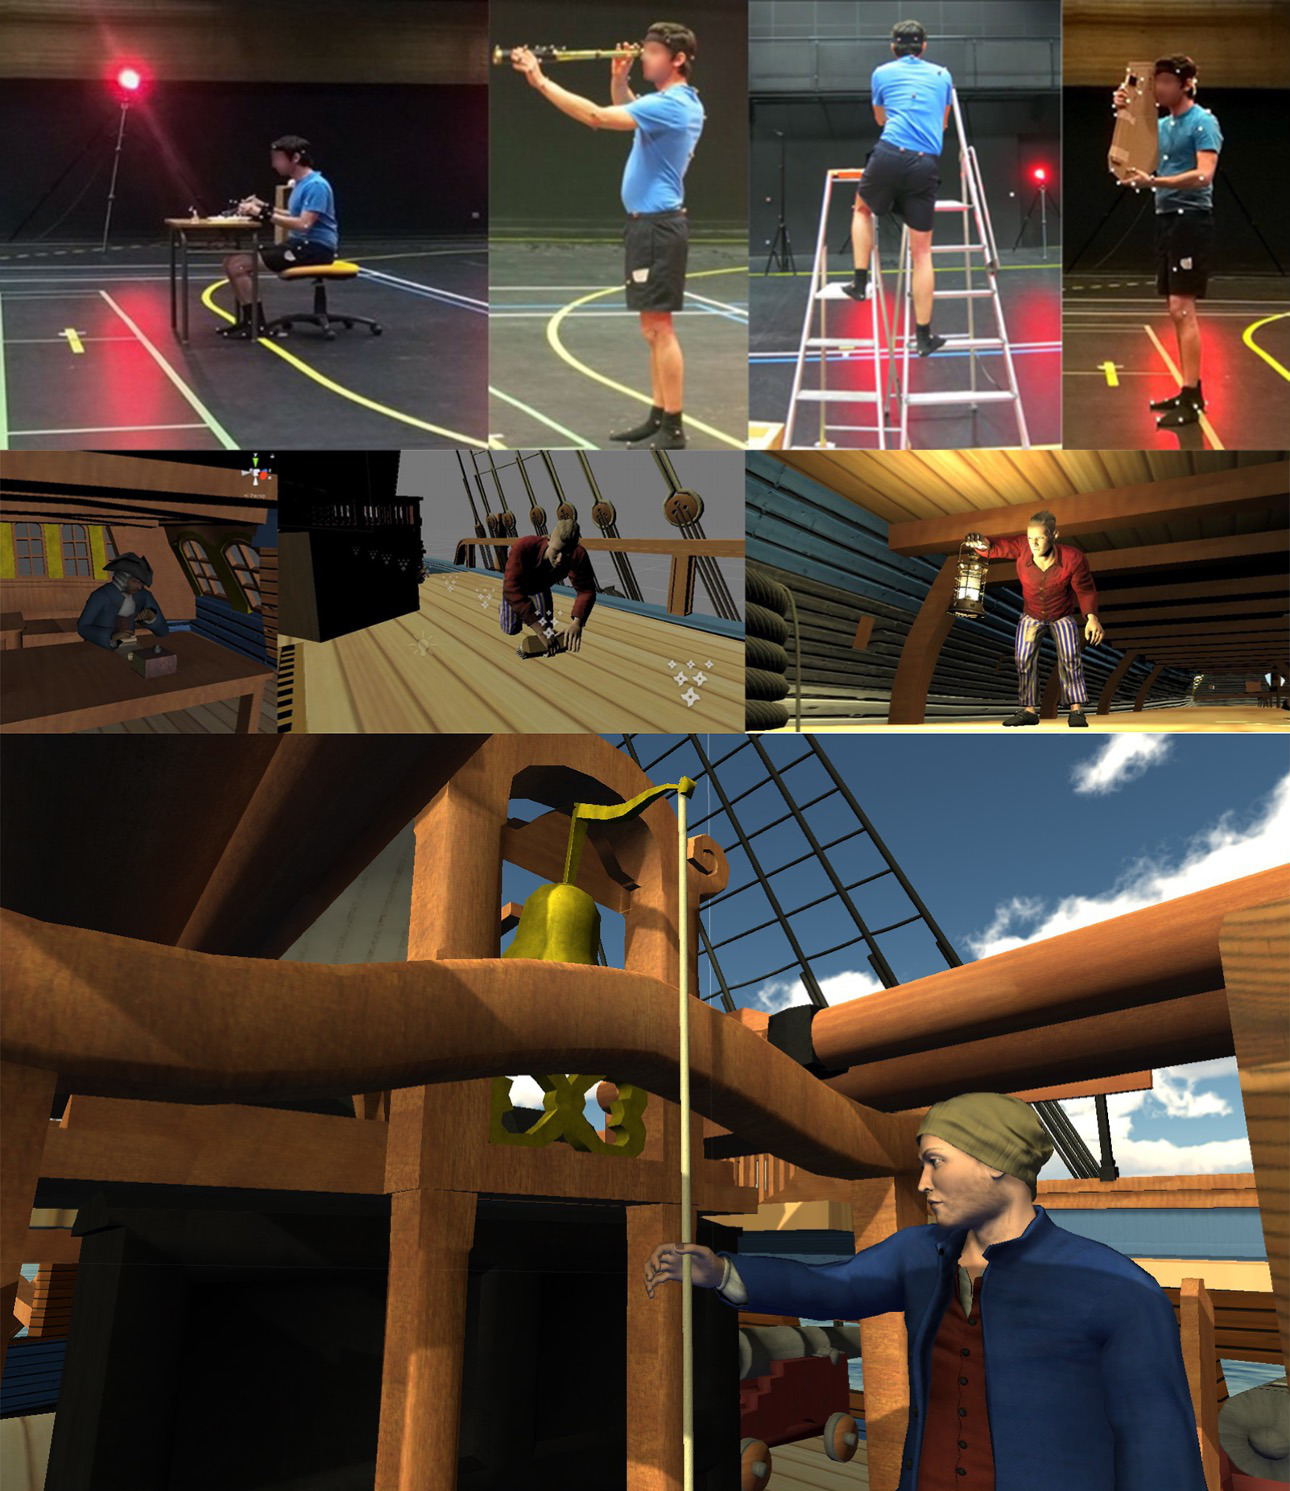 Mocap of onboard activity with Historians, and restitution in the simulation of the 18th century ship.